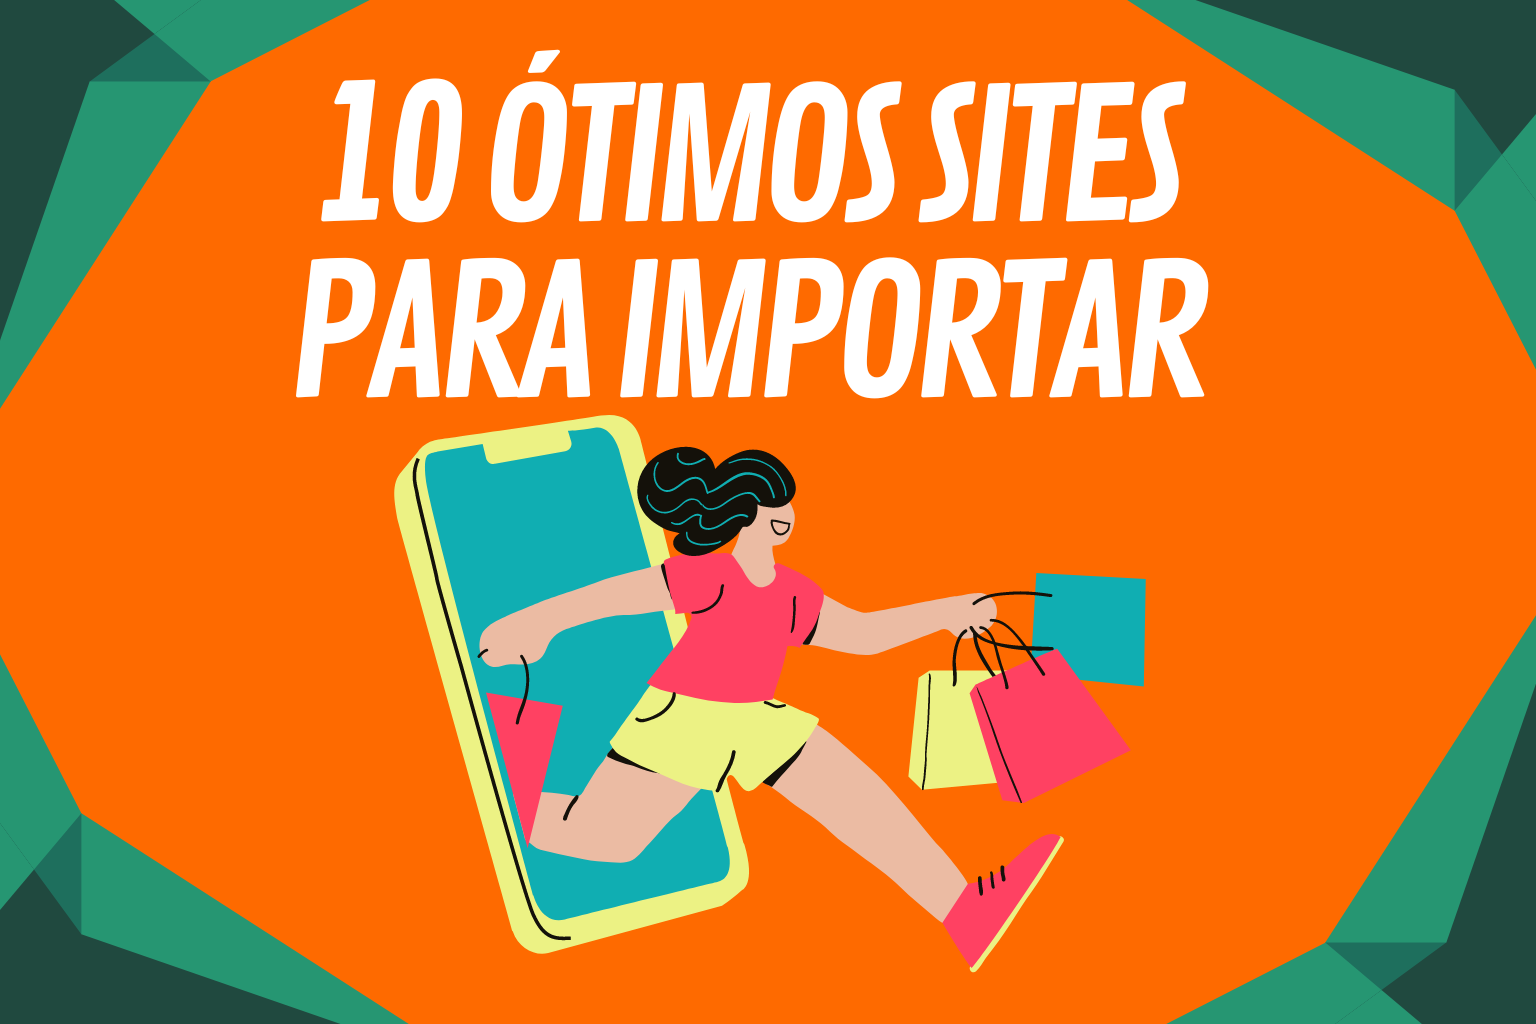 10 American websites for shopping: check out the best options!